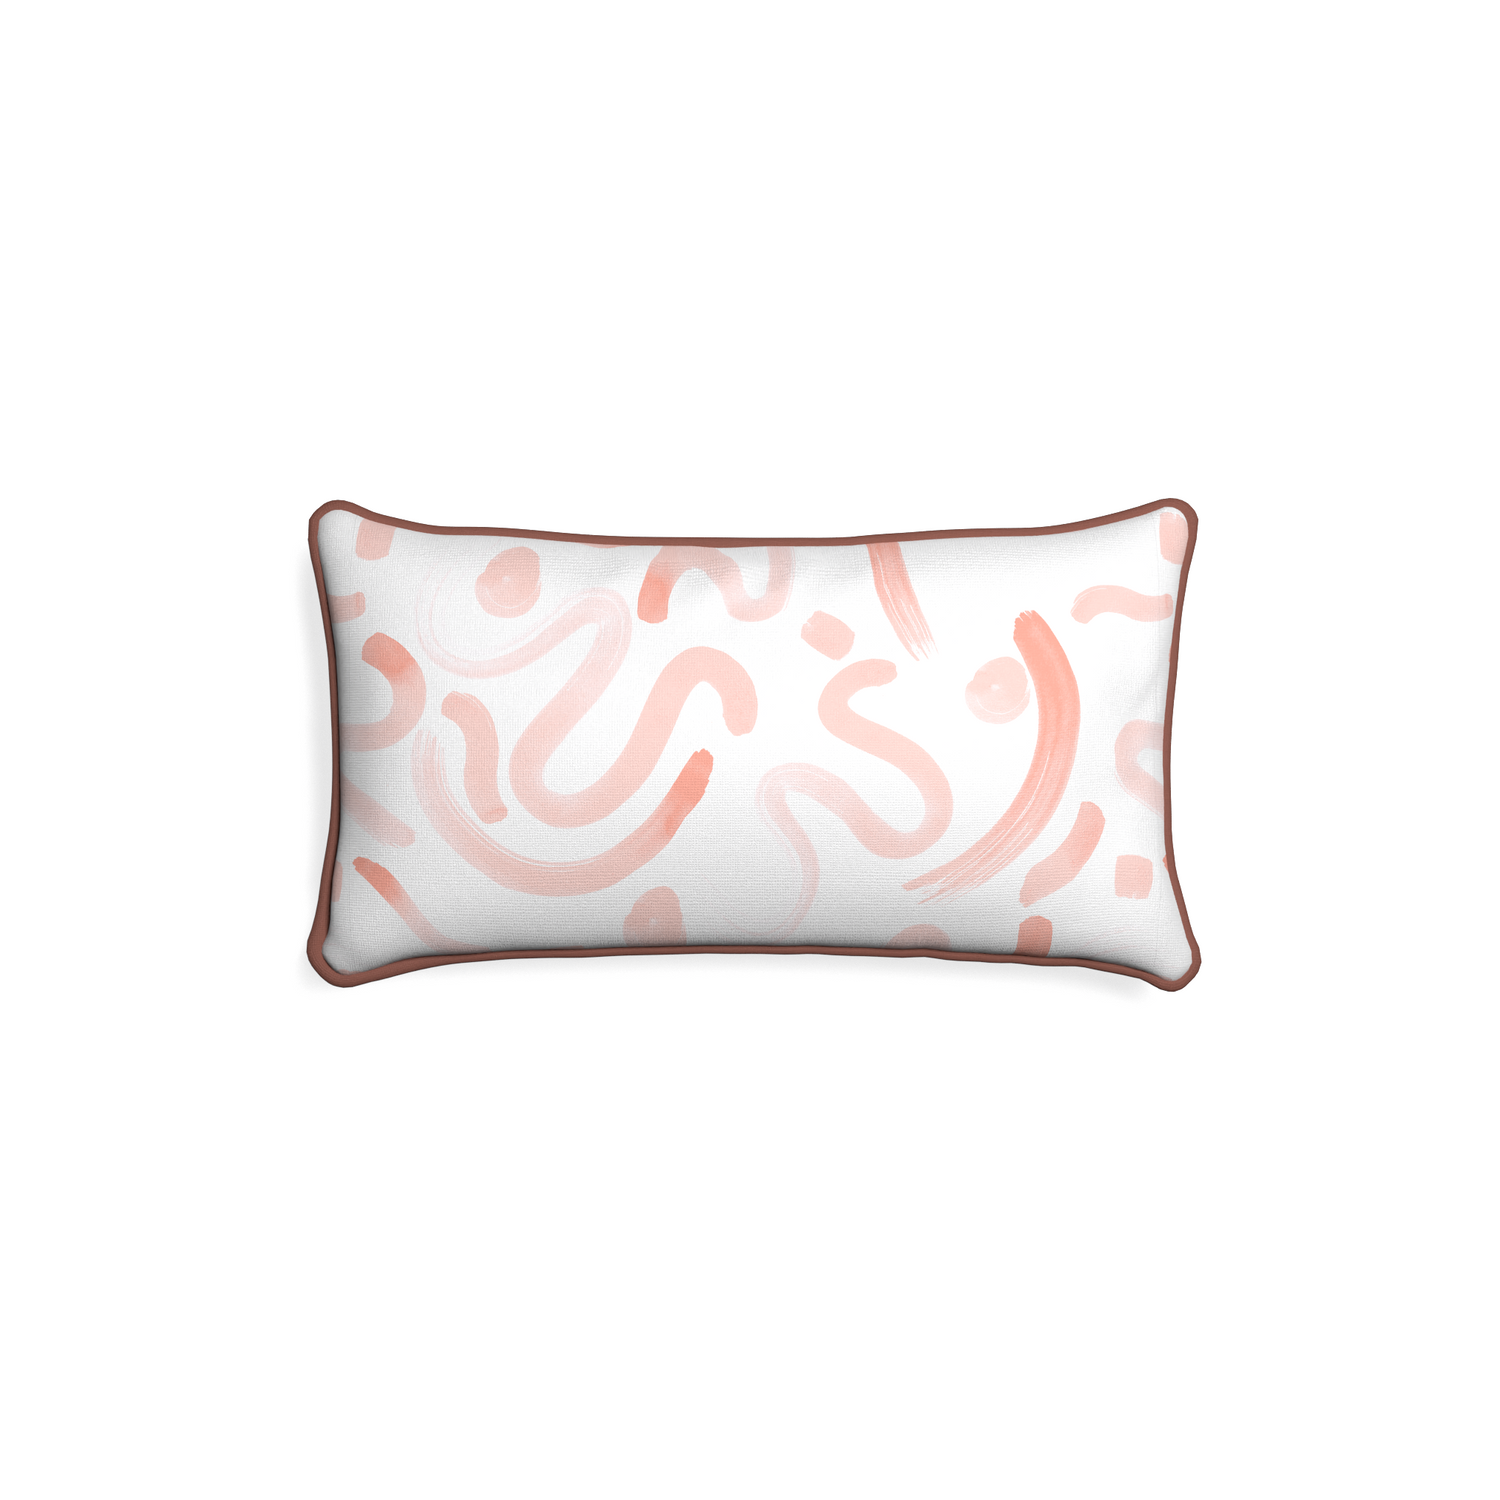 Petite-lumbar hockney pink custom pink graphicpillow with w piping on white background